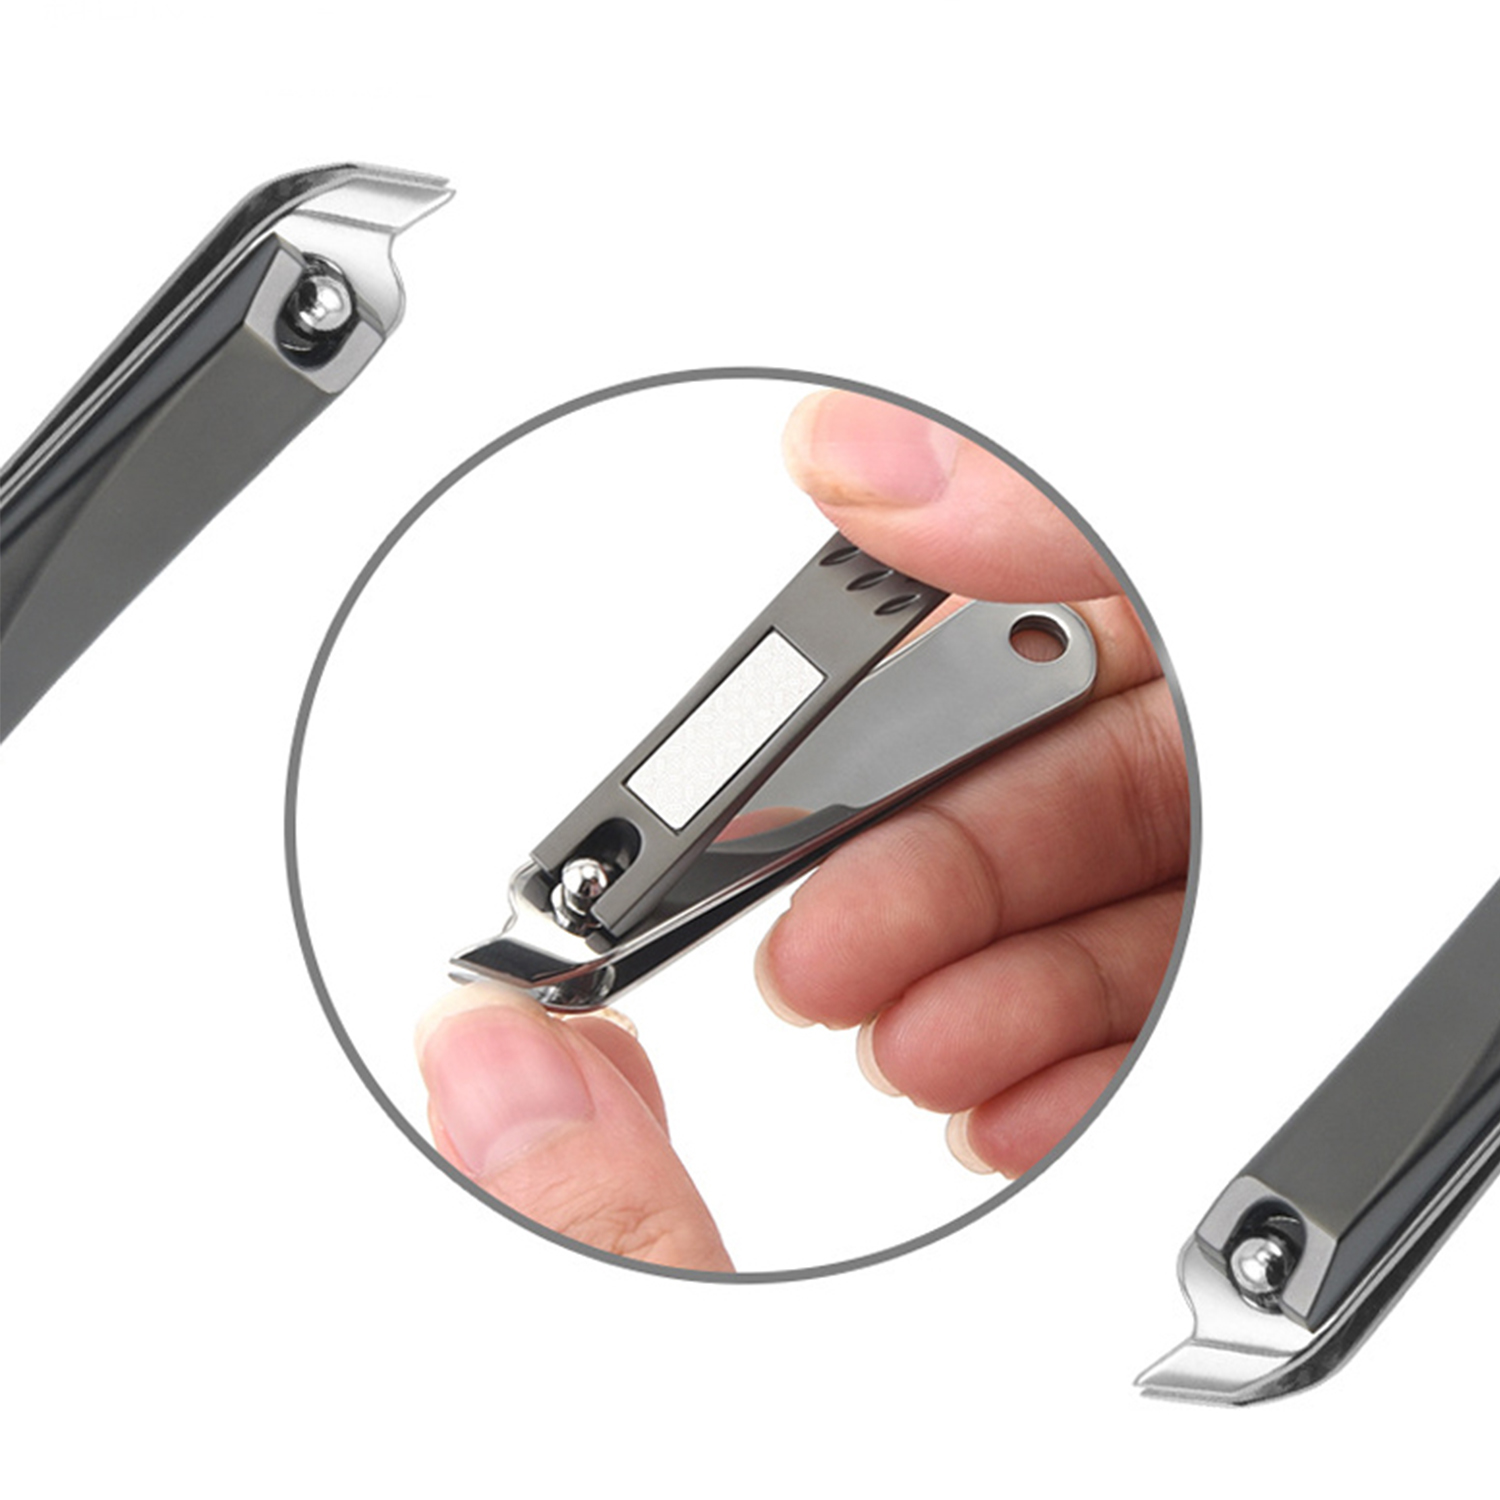 High Quality Nail clipper with Build-in Nail File, Durable Sharp Fingernail Clipper and Toenail Clipper